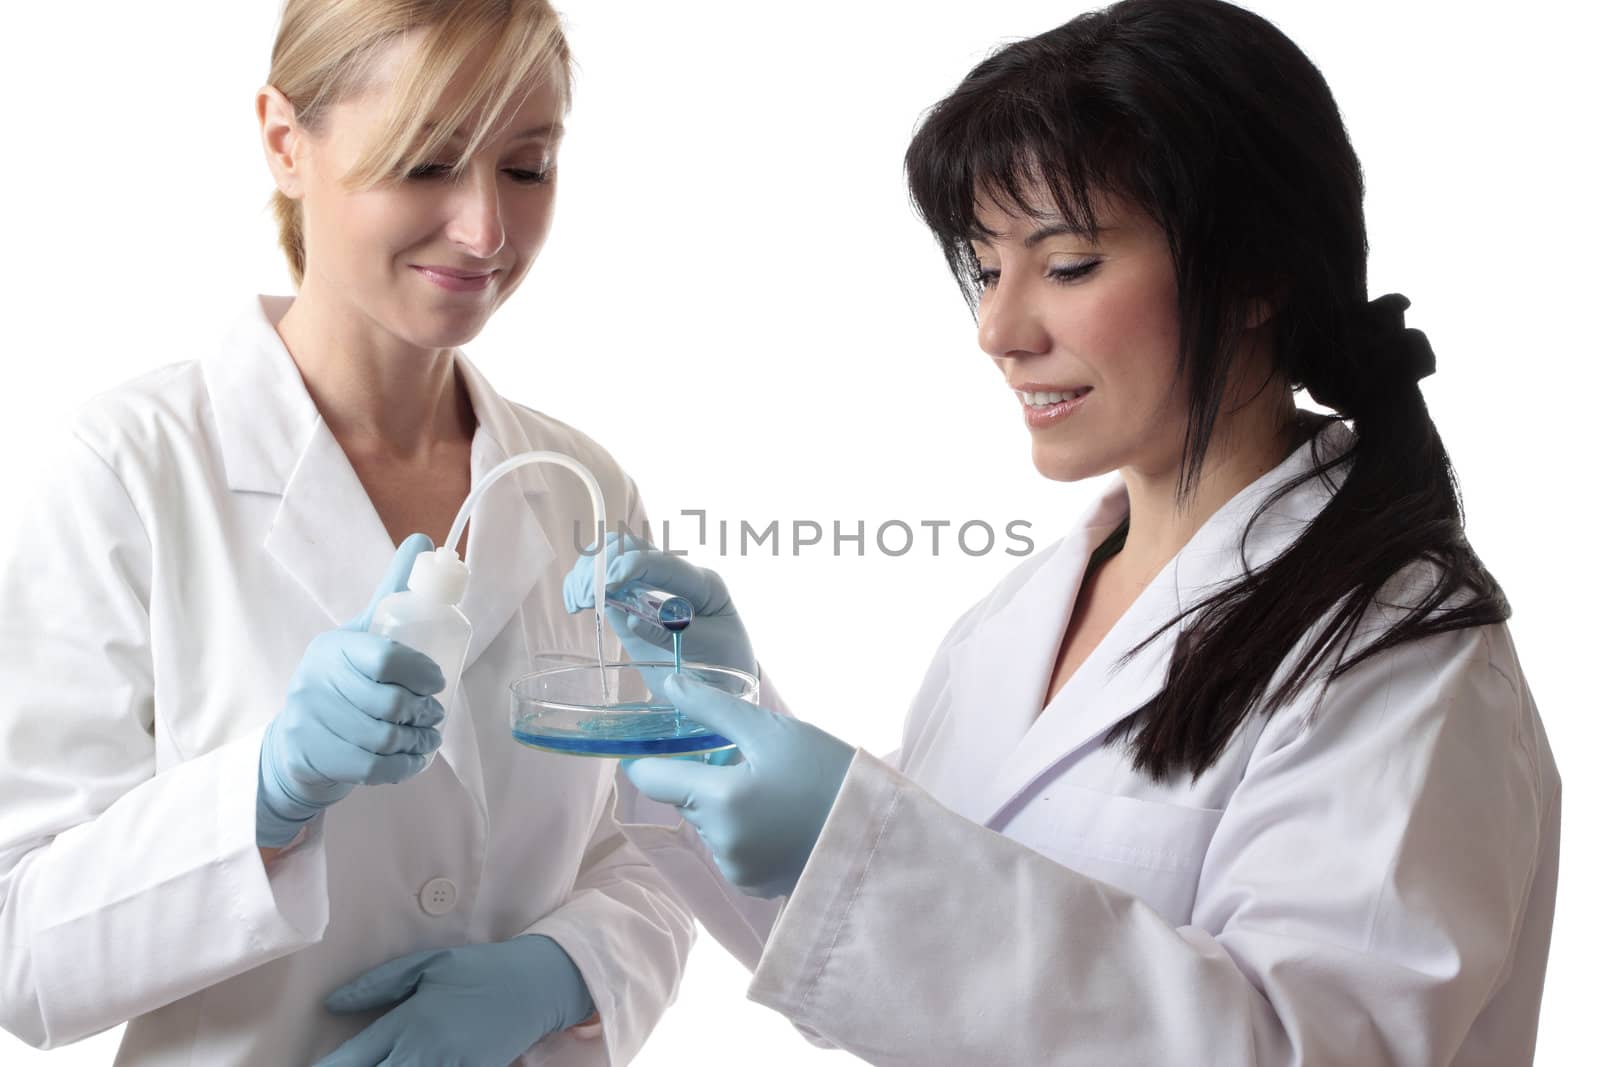 Female scientists at work conducting research